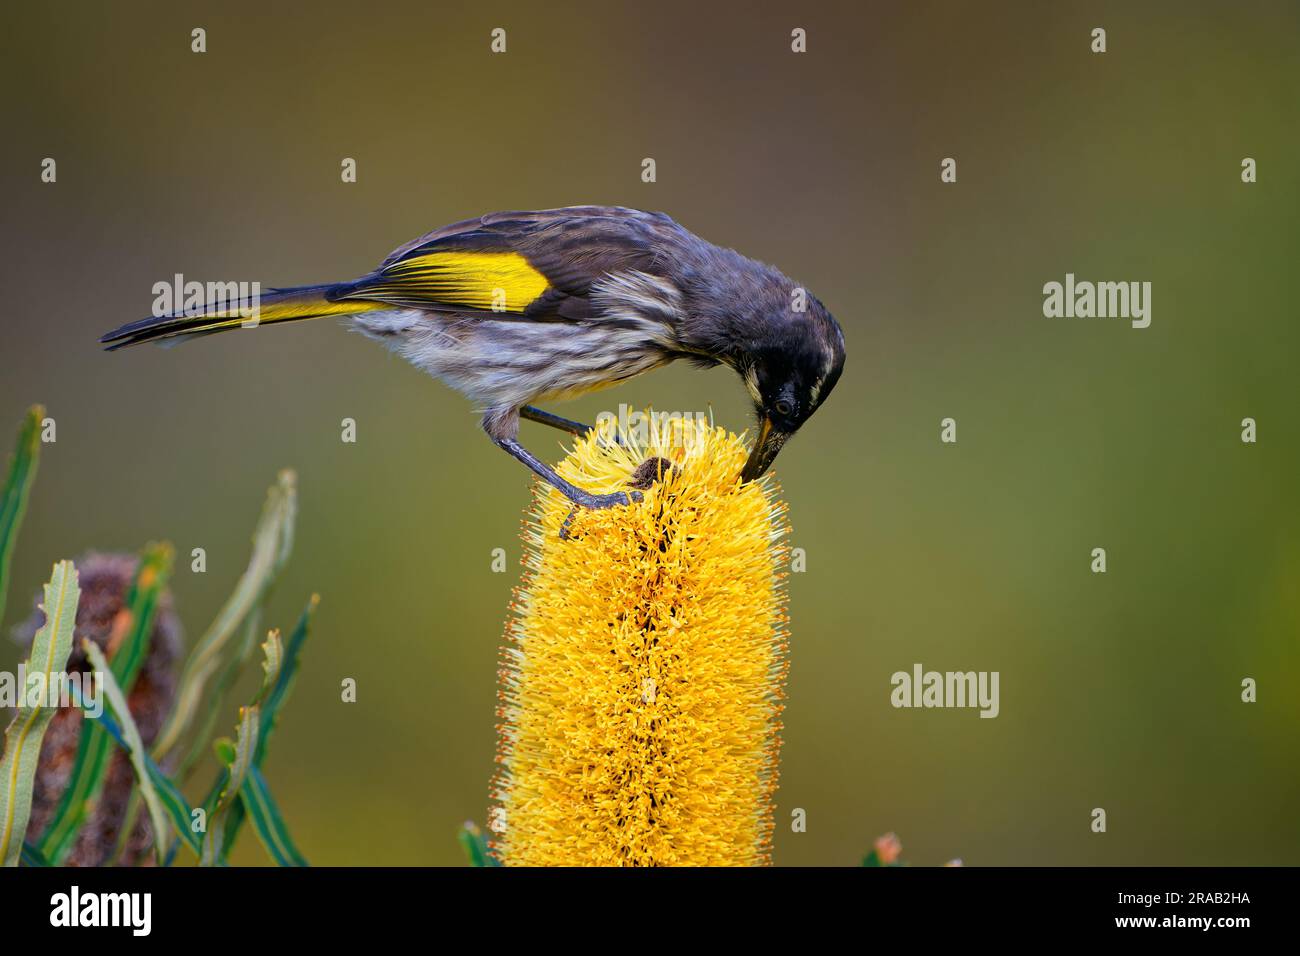 New Holland Honeyeater - Phylidonyris novaehollandiae - australian bird with yellow color in the wings feeding on nectar on the yellow banksia blossom Stock Photo